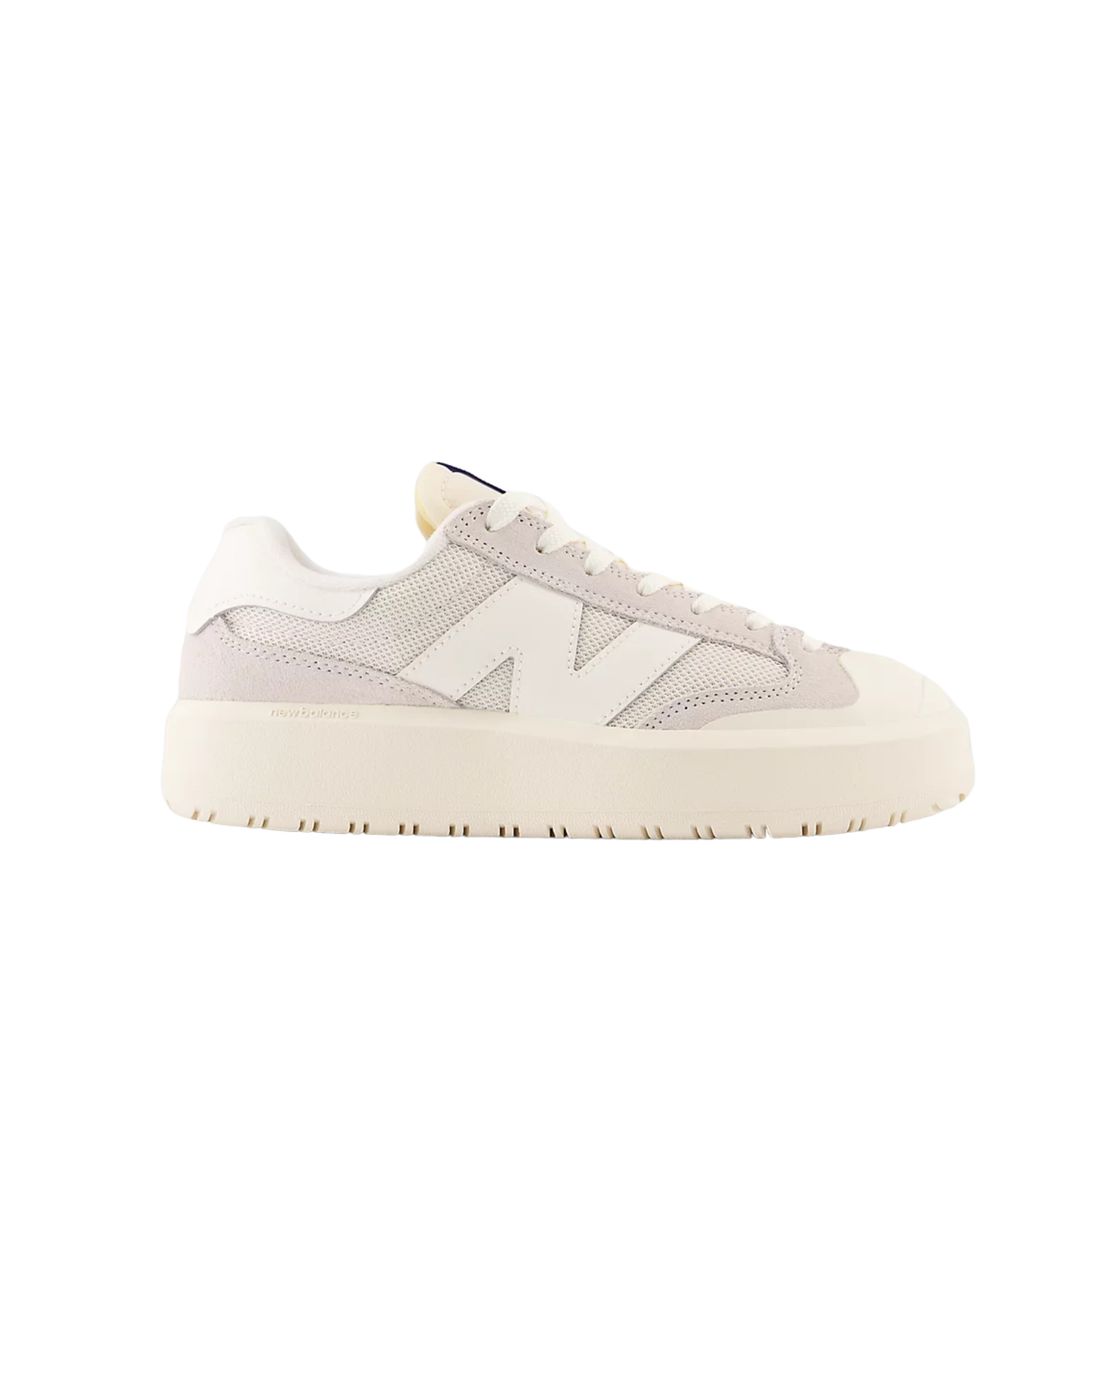 Chaussures femme ct302rb new Balance